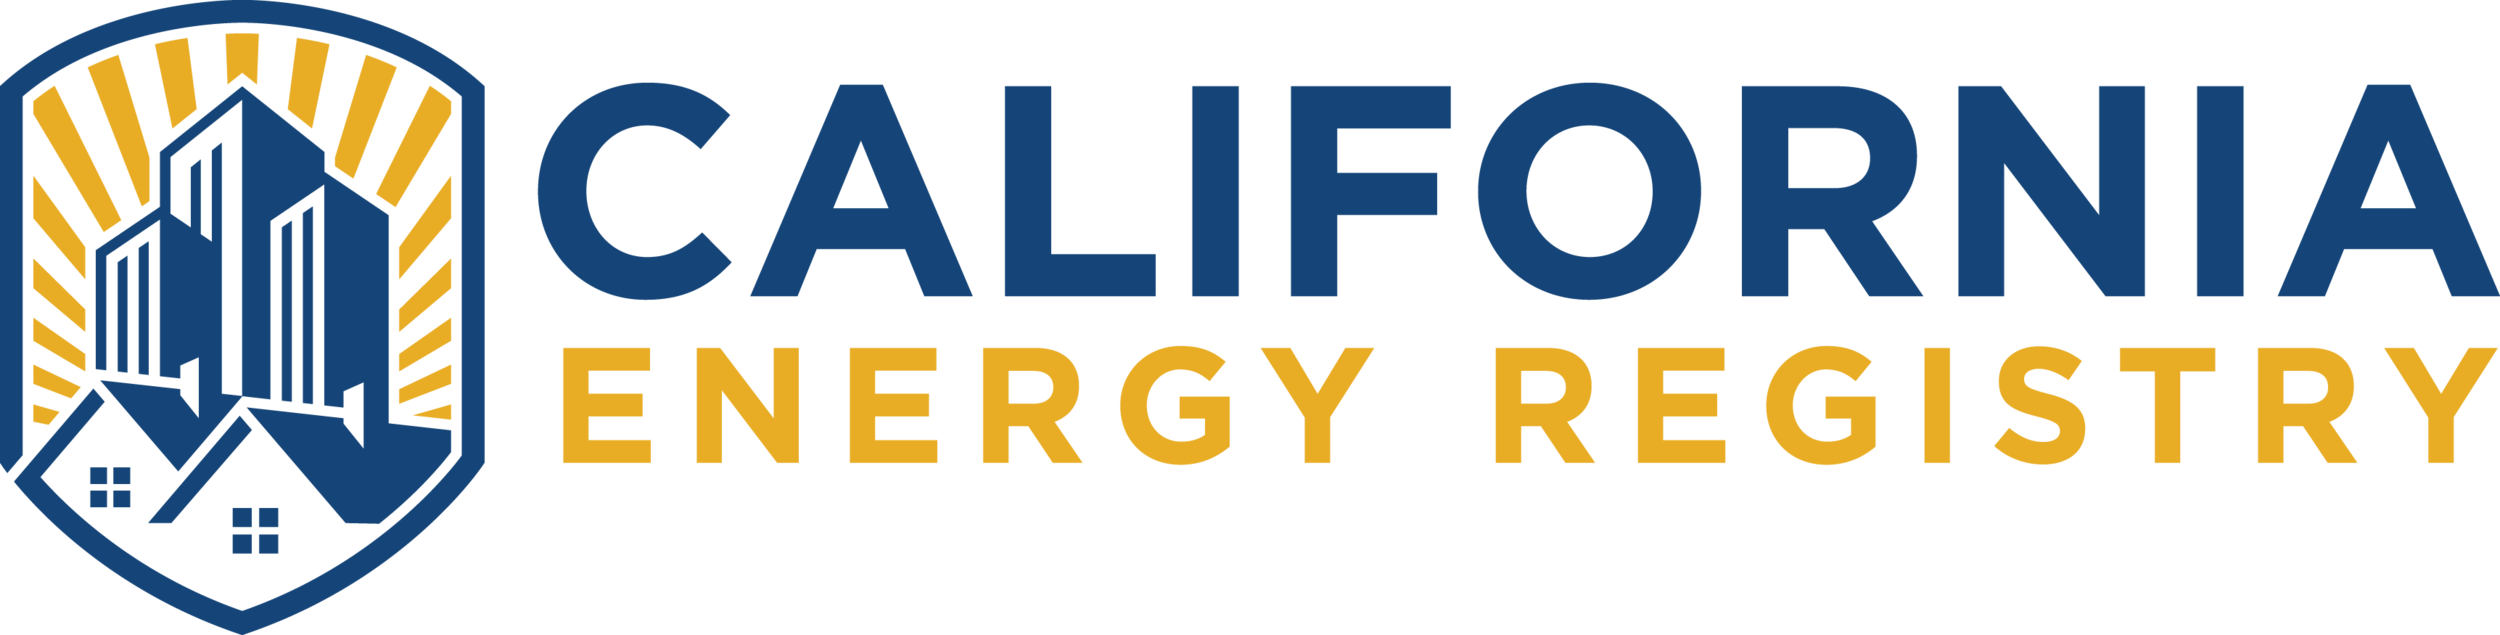 calenergy.png